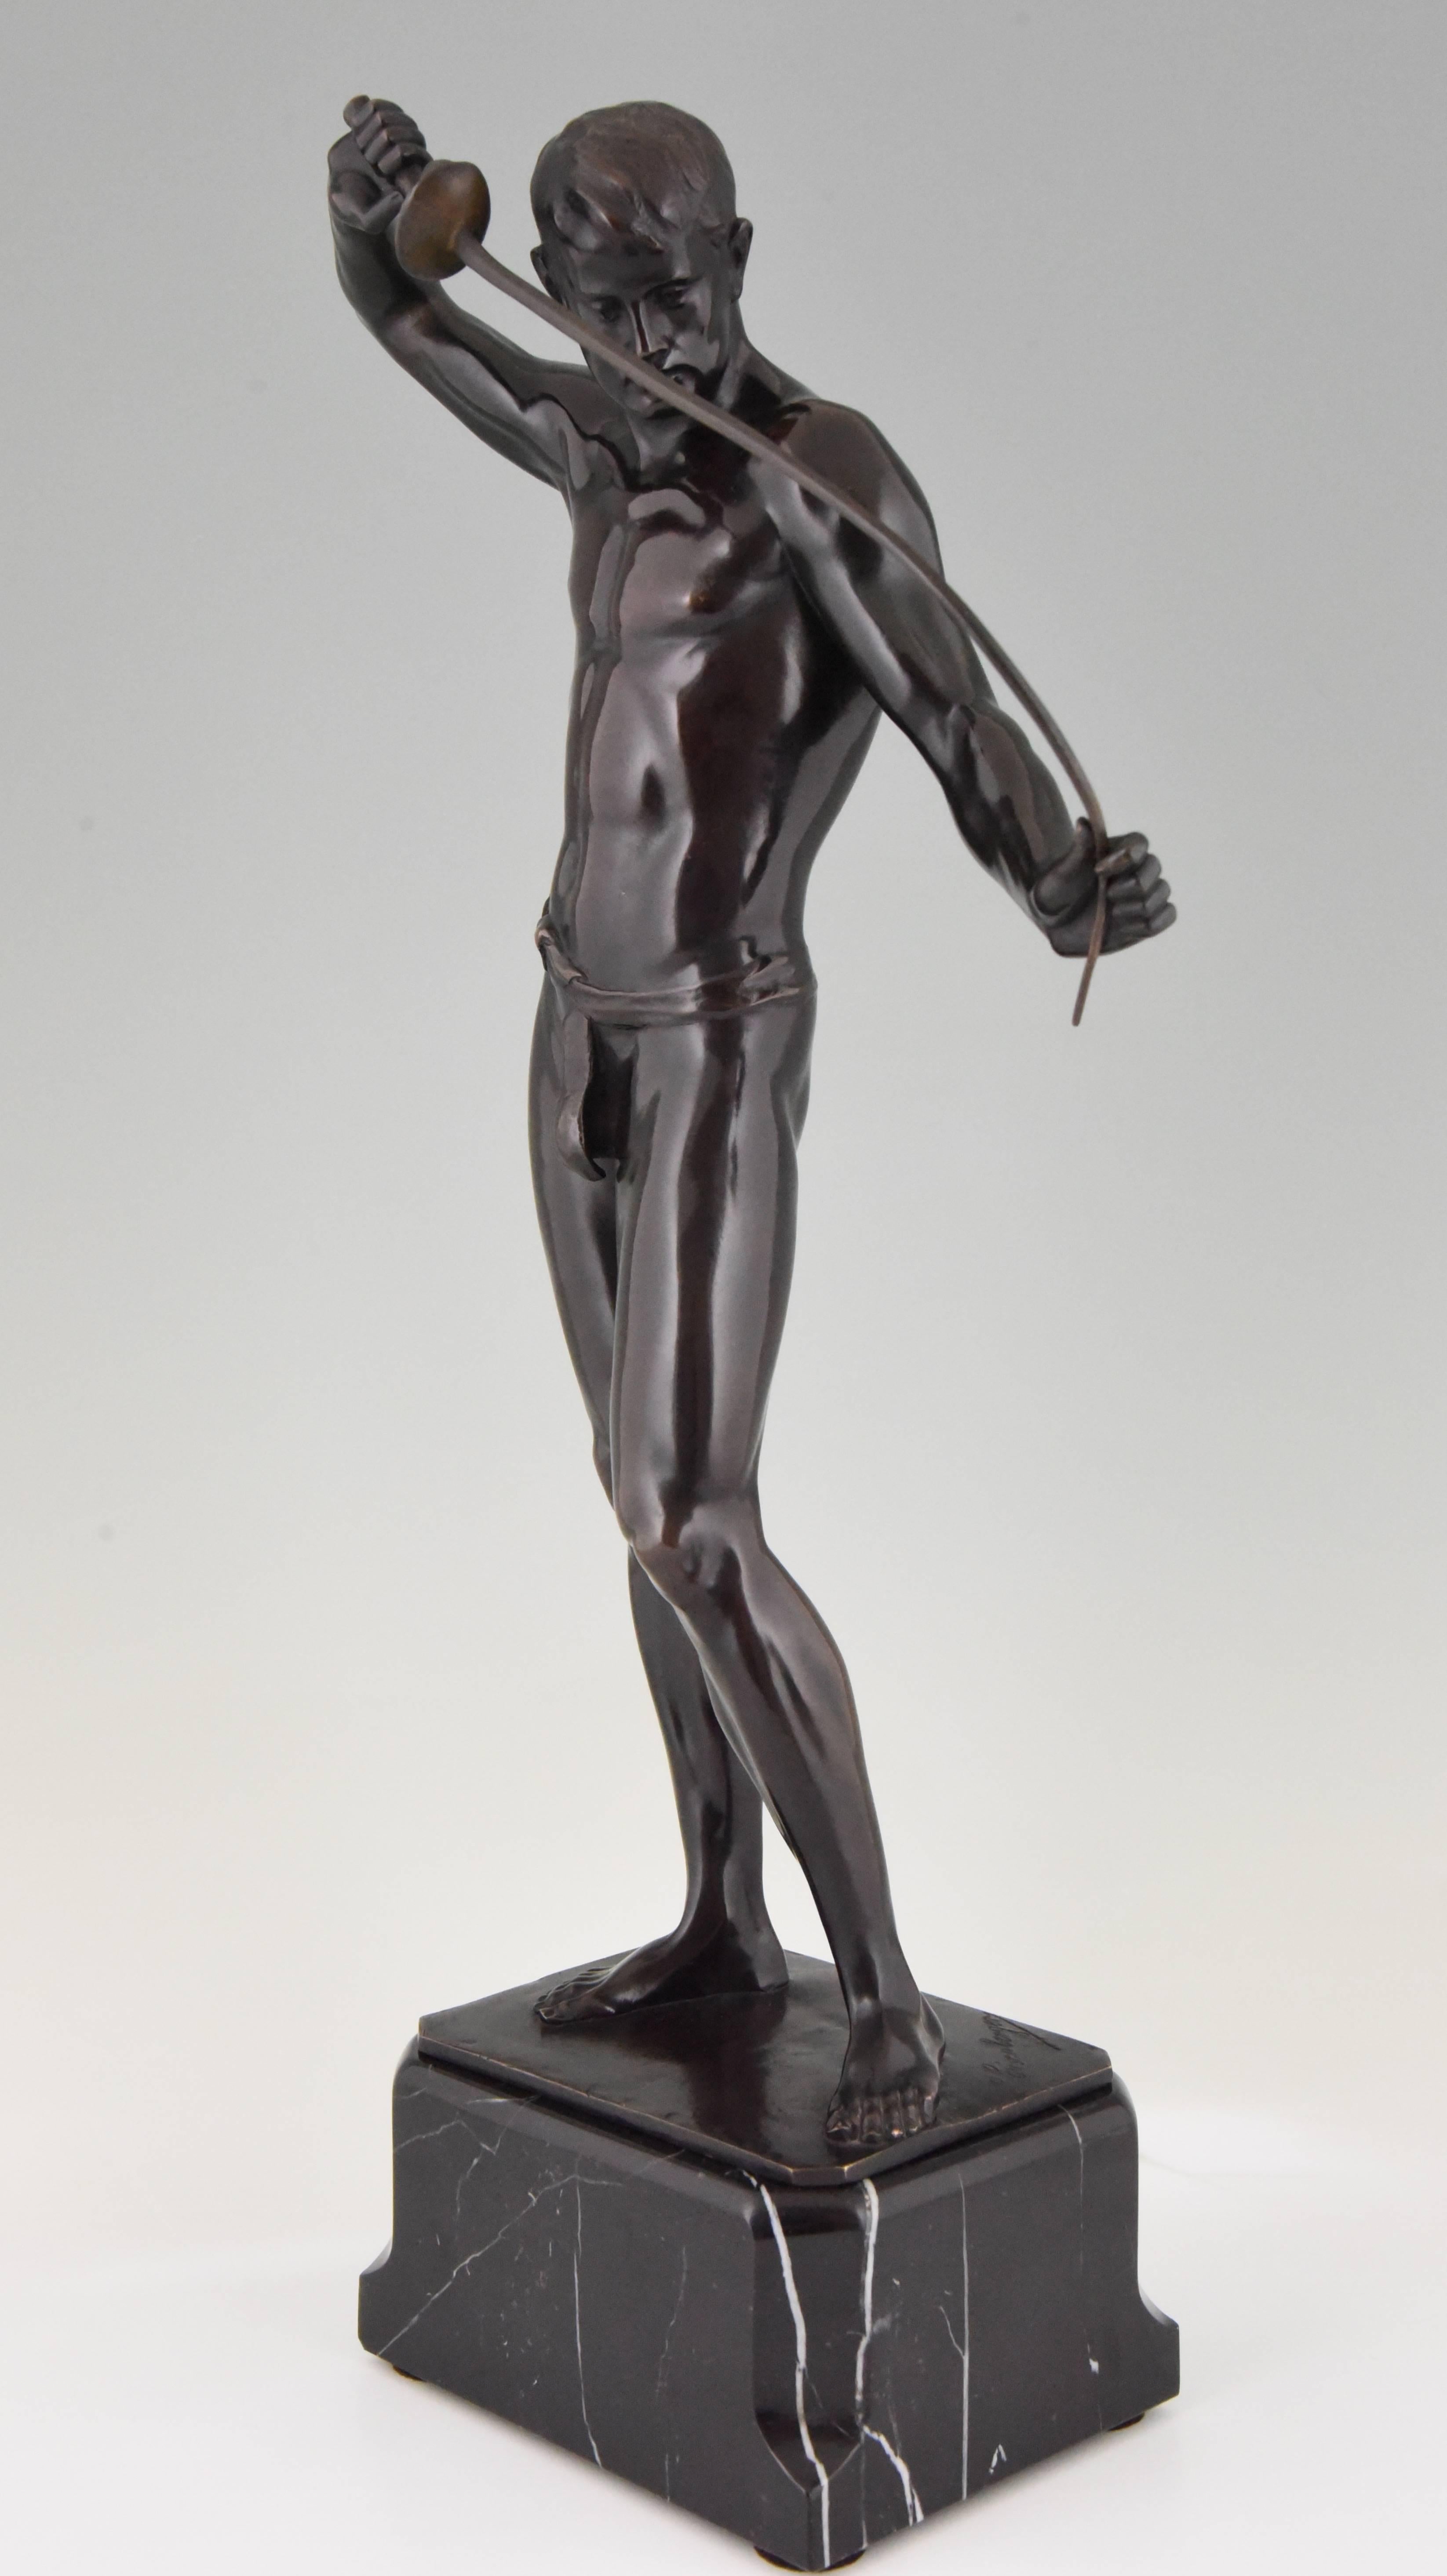 Fine antique bronze sculpture of a standing male nude fencer holding and flexing an épée, on marble plinth by the German artist Ludwig Eisenberger. 

Signature/ Marks: L. Eisenberger
Style: Classical
Date: 1900
Material: Patinated bronze.